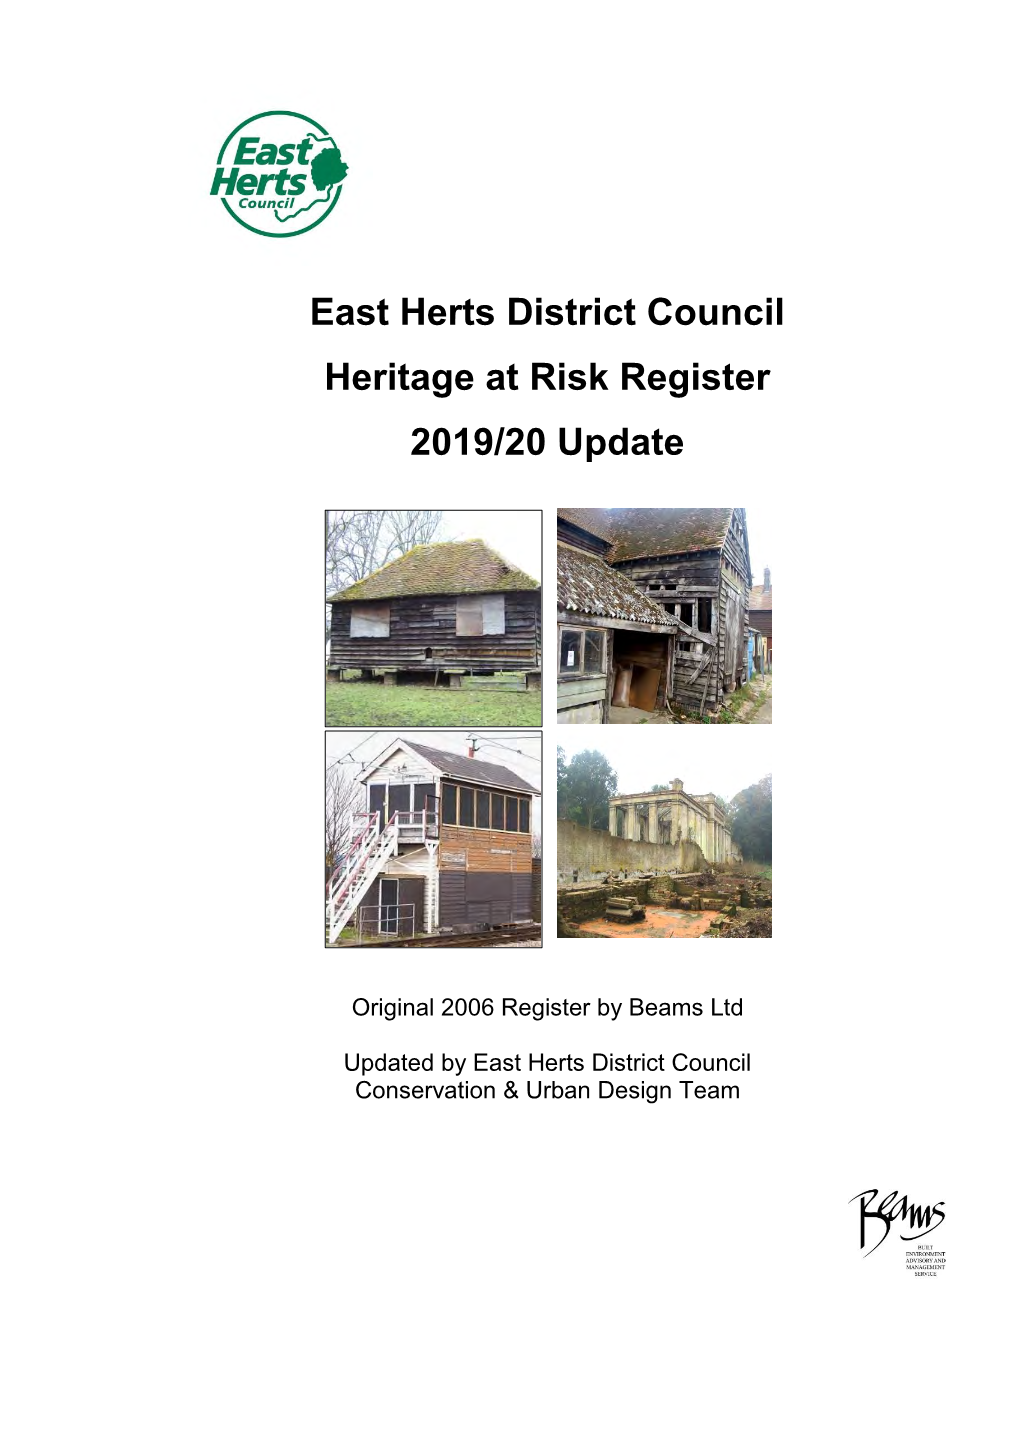 East Herts District Council Heritage at Risk Register 2019/20 Update